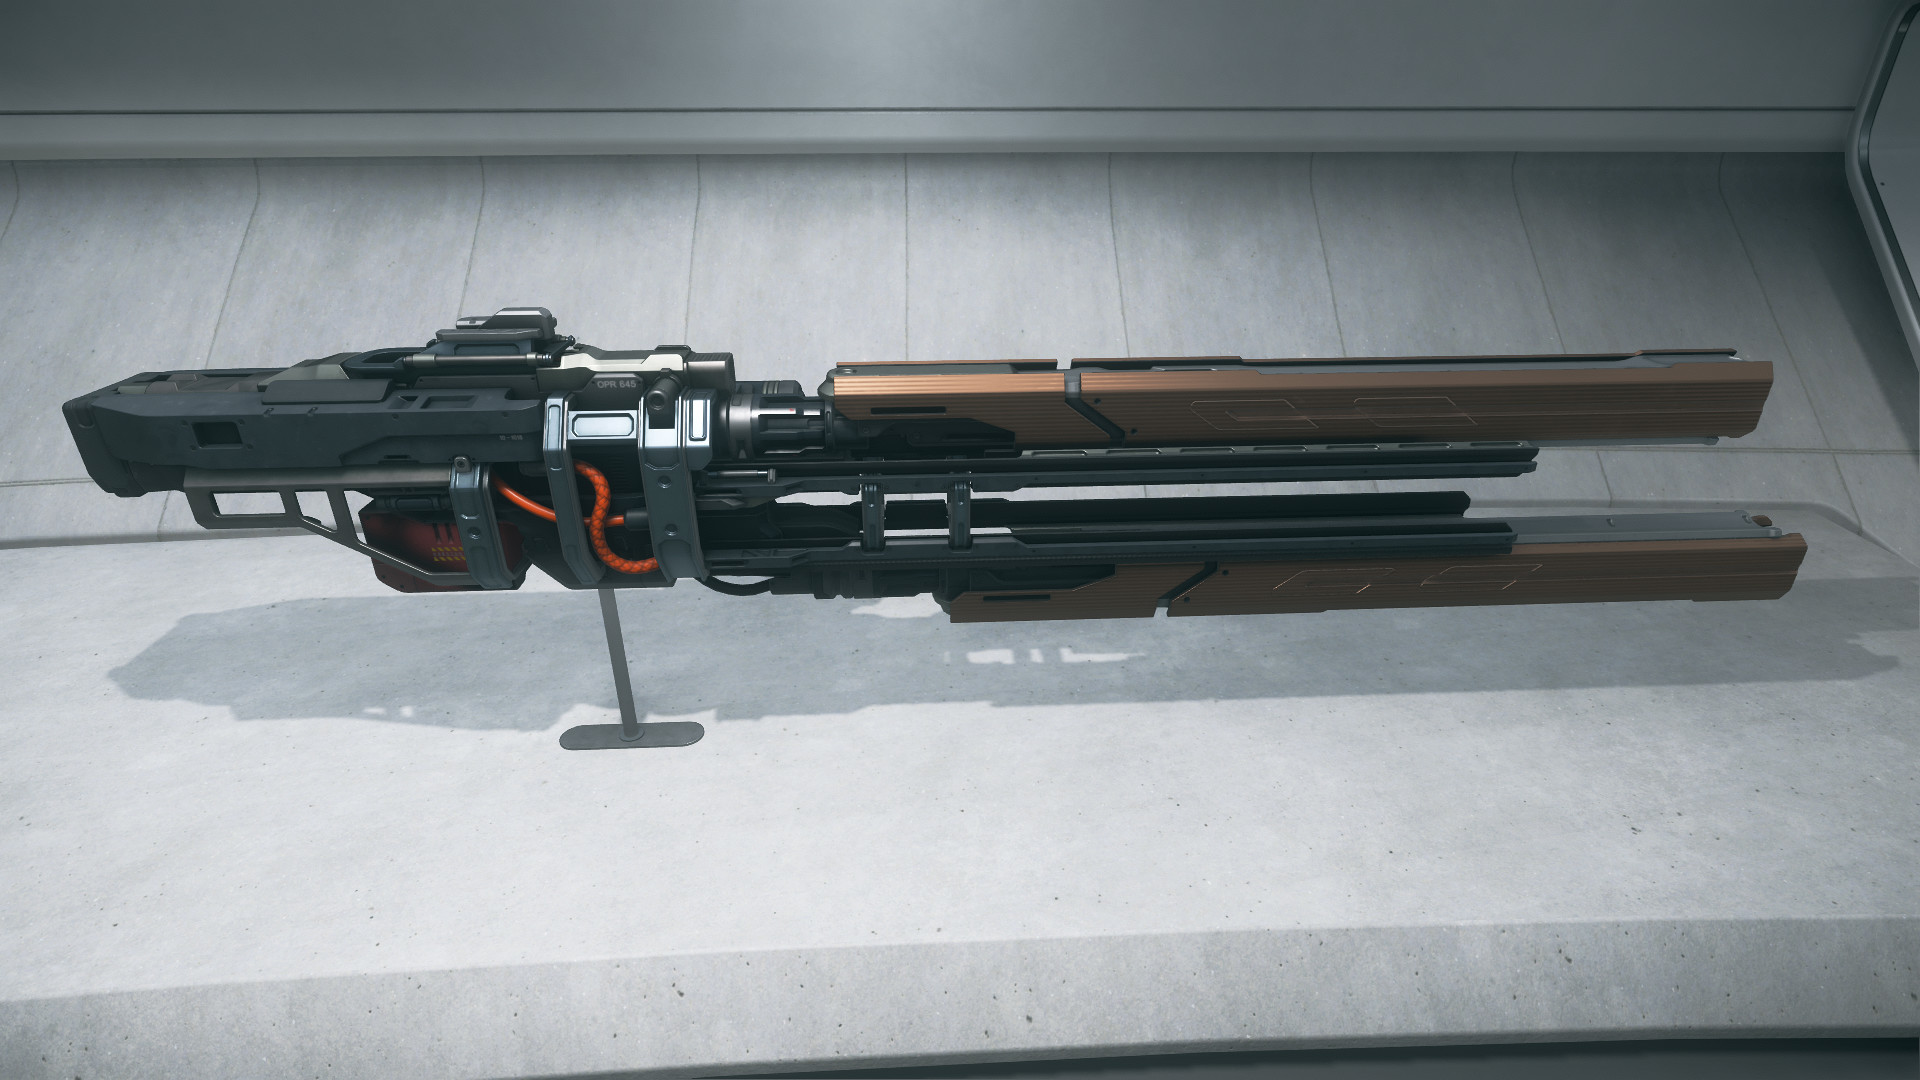 star citizen ship weapons